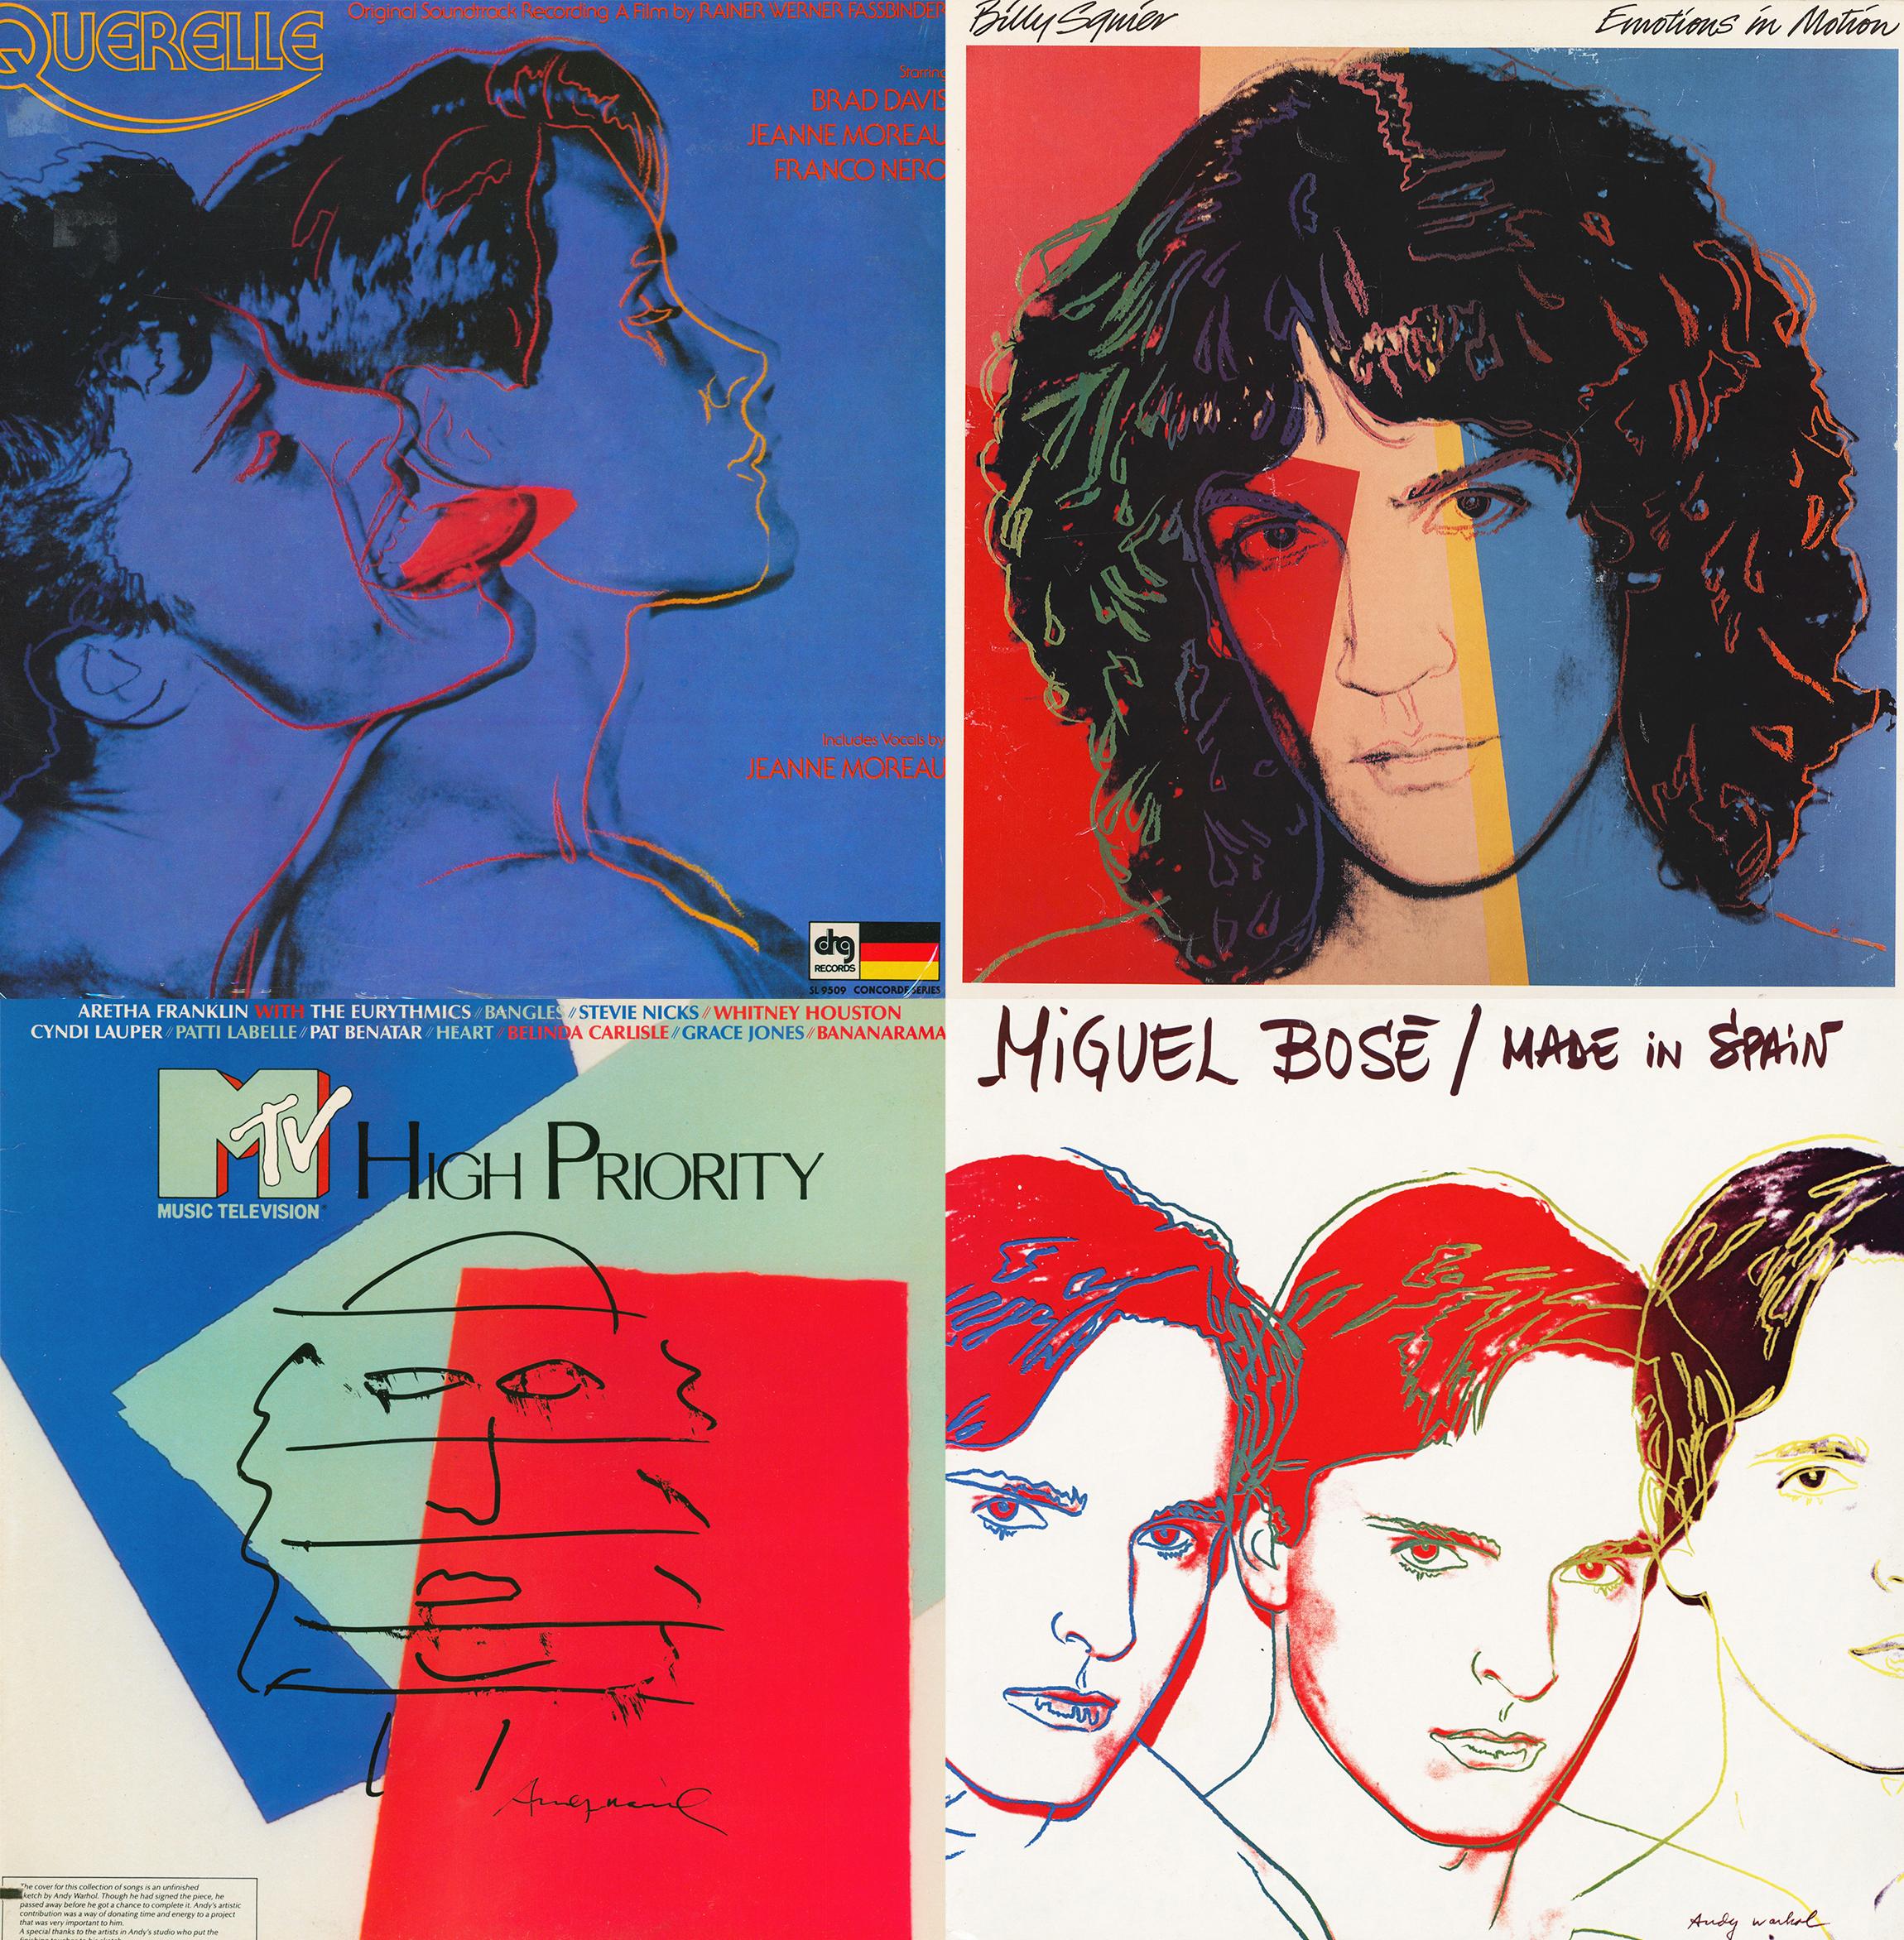 Andy Warhol Designed Record Covers (Andy Warhol record art)